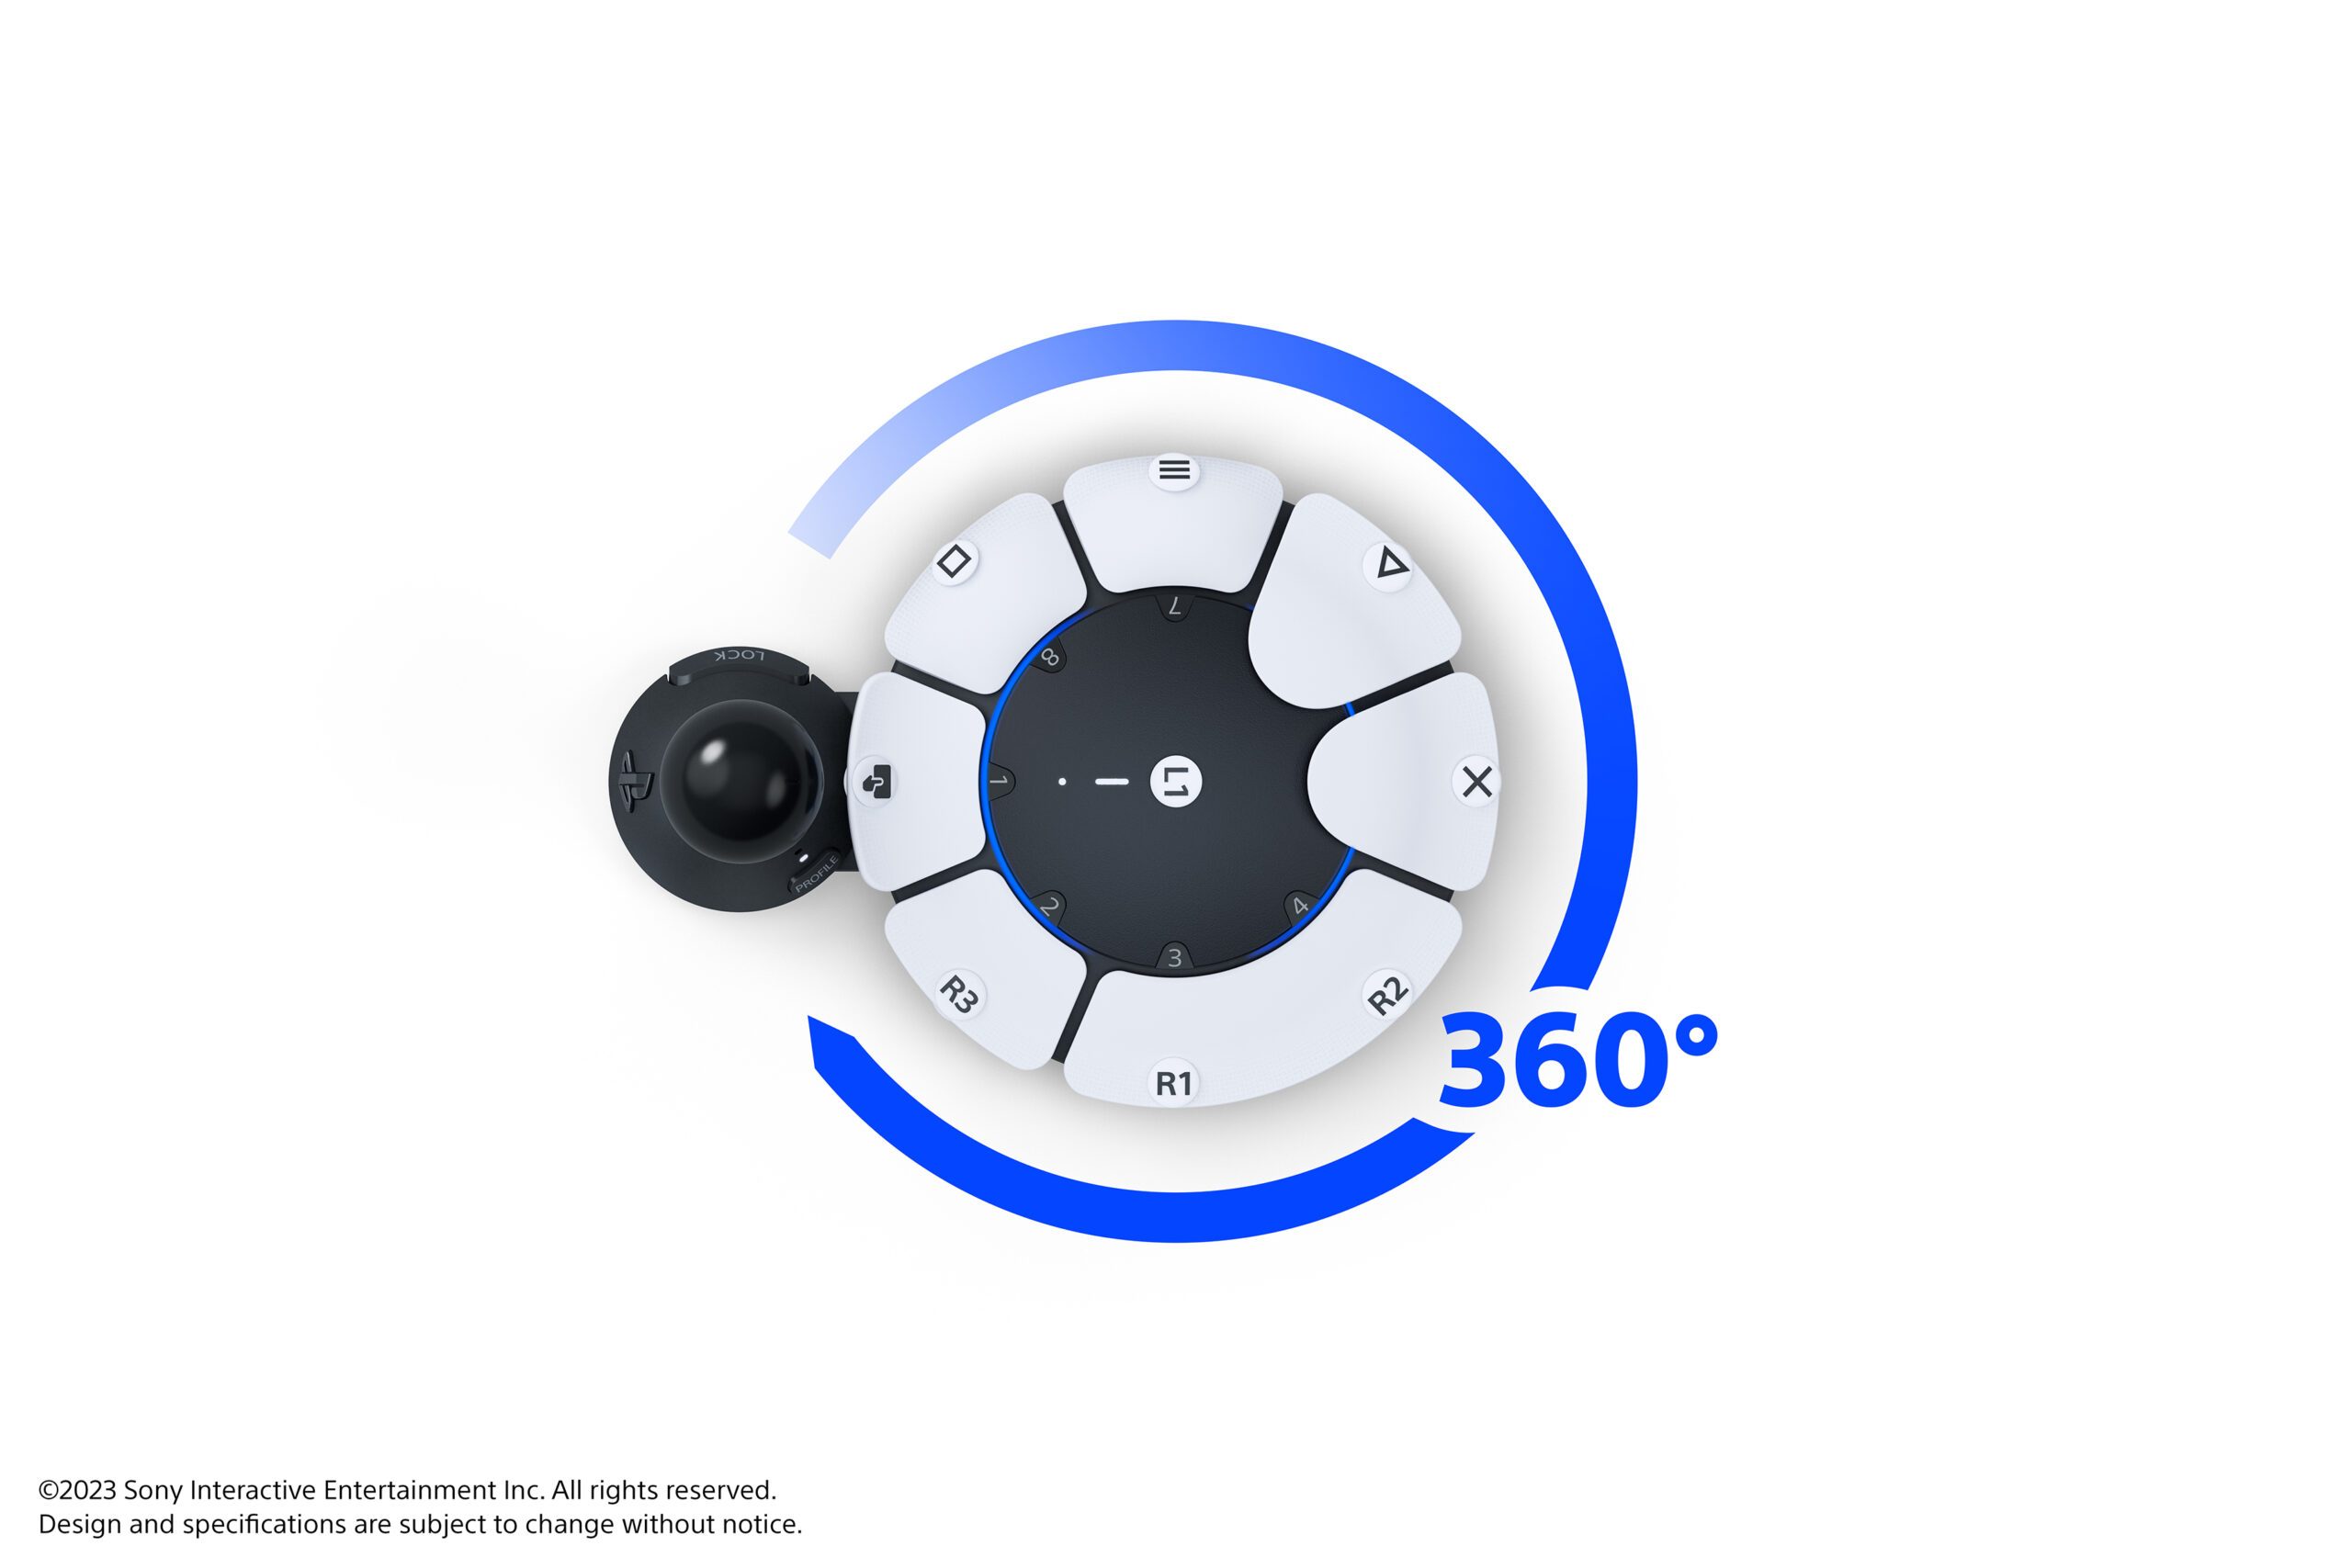 Image showing 360 degree orientation options for the Access controller